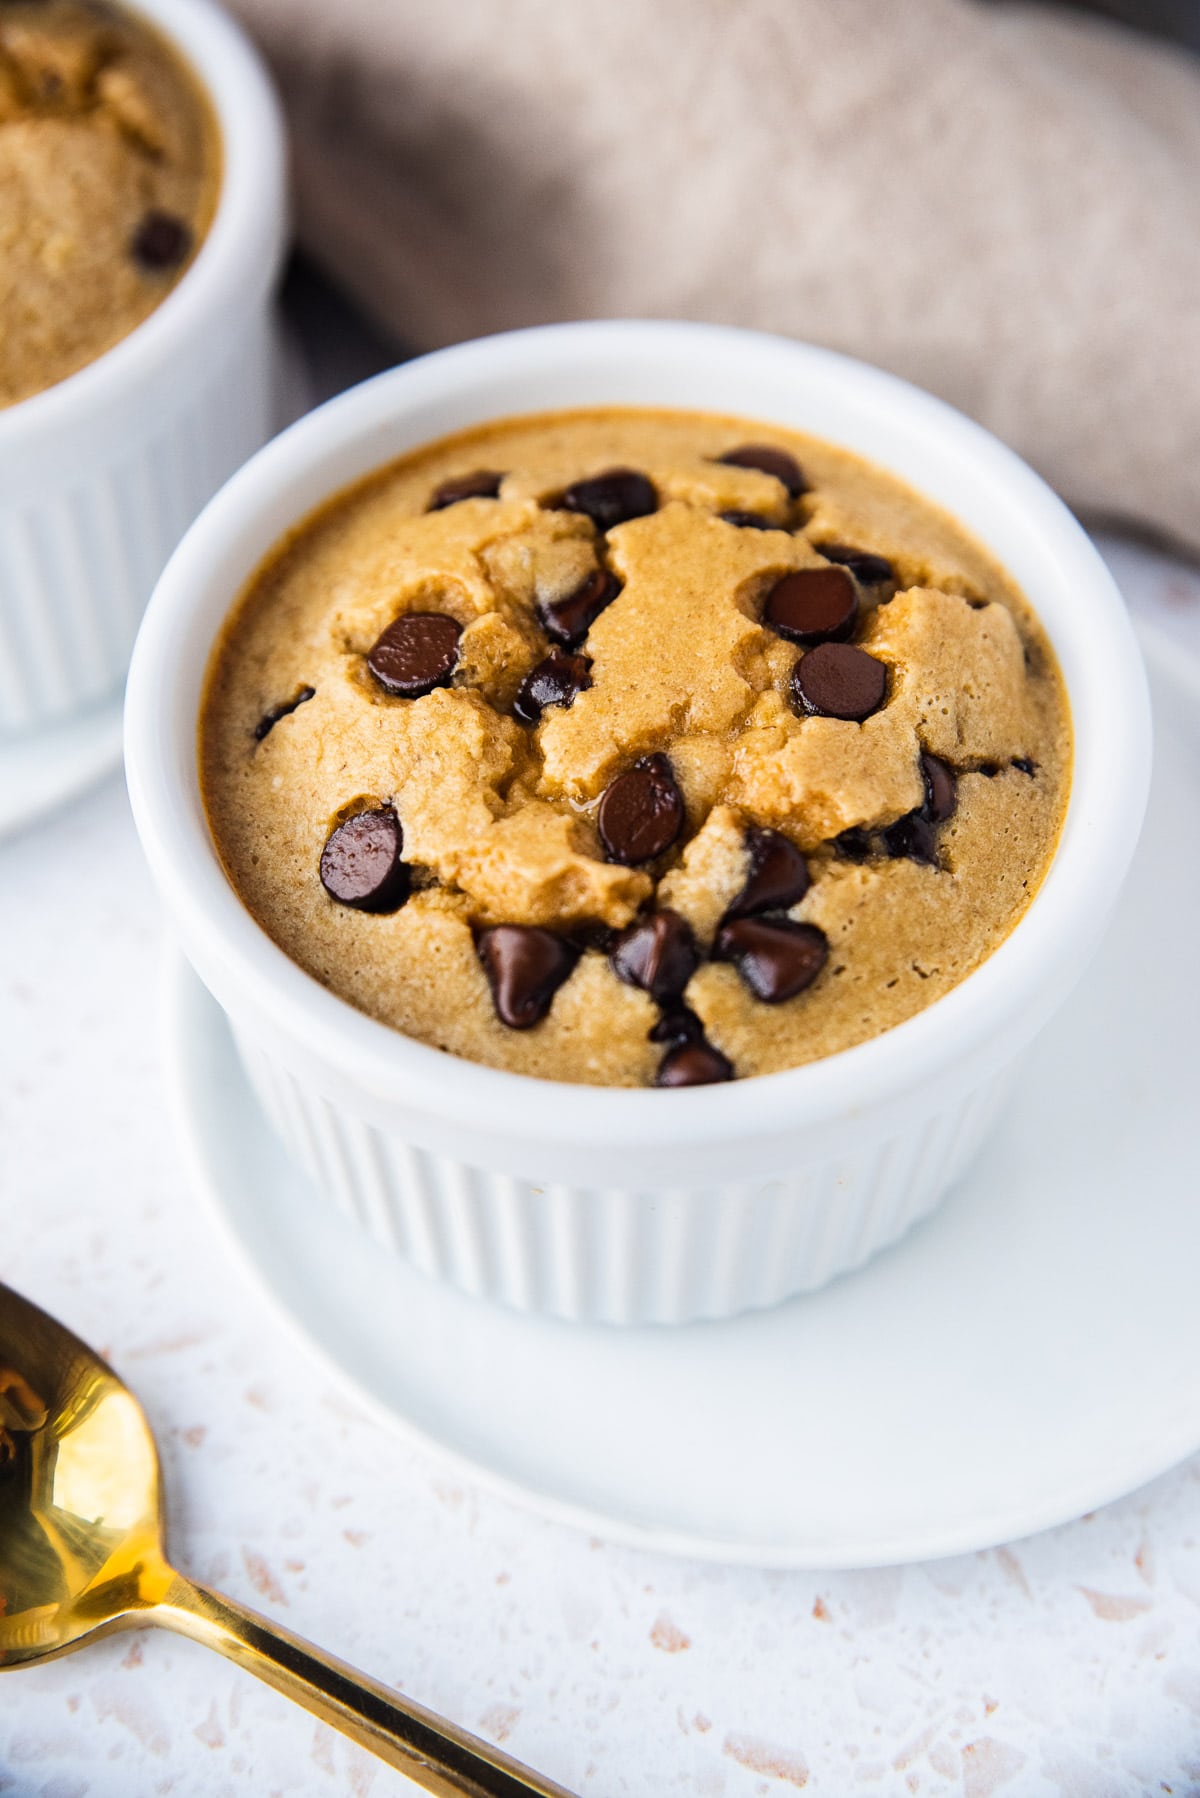 Chocolate Chip Blended Baked Oats in a white ramekin